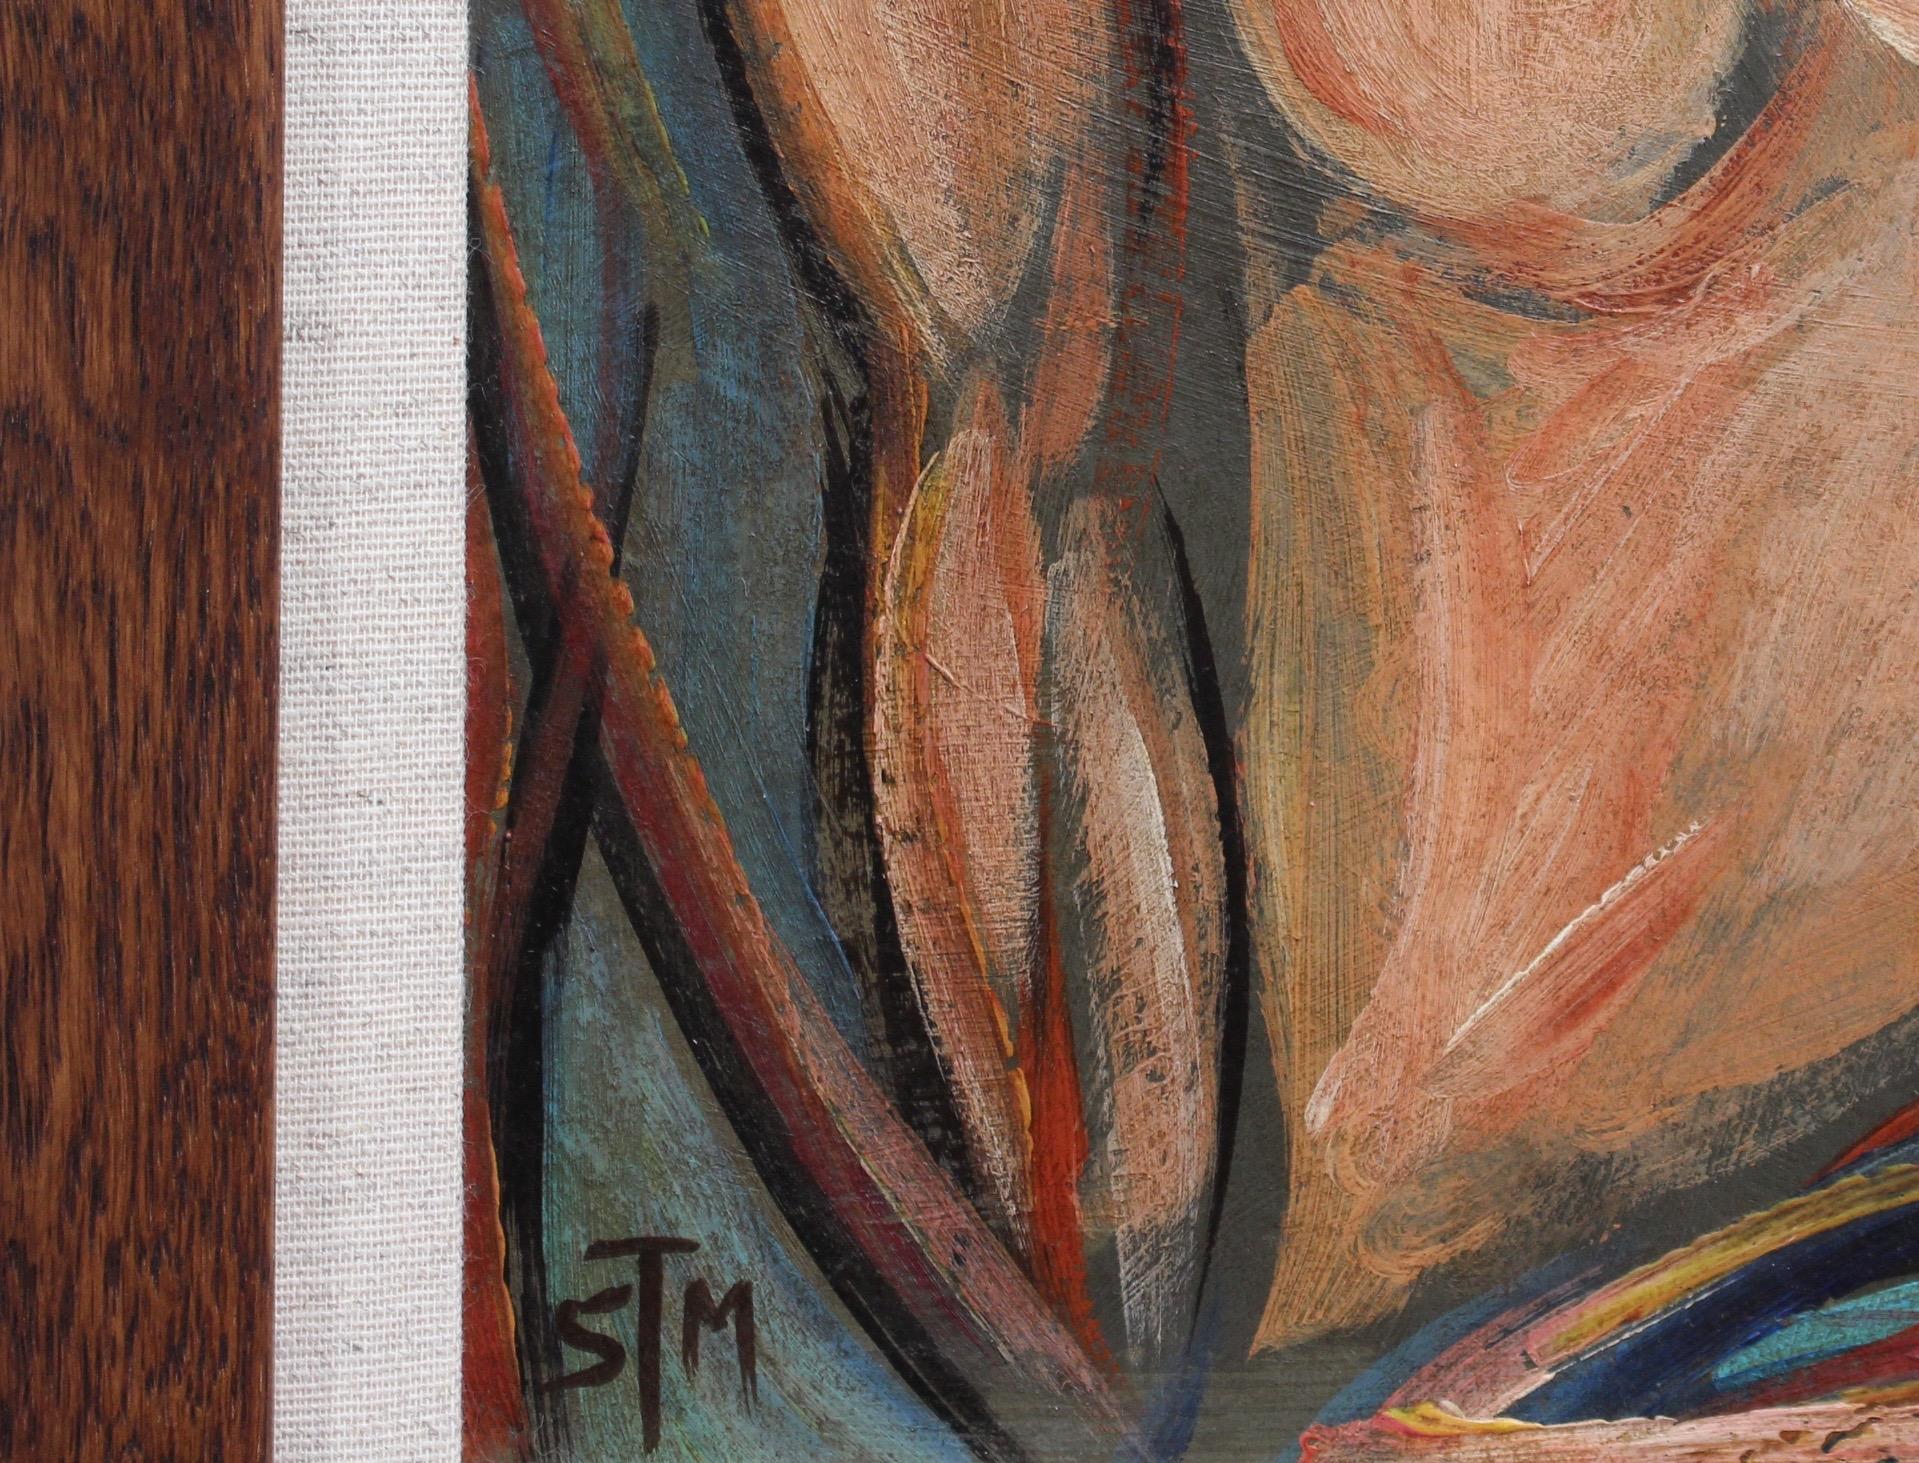 'Nudes in Repose' by STM, Mid-Century Modern Cubist Portrait Painting, Berlin 9